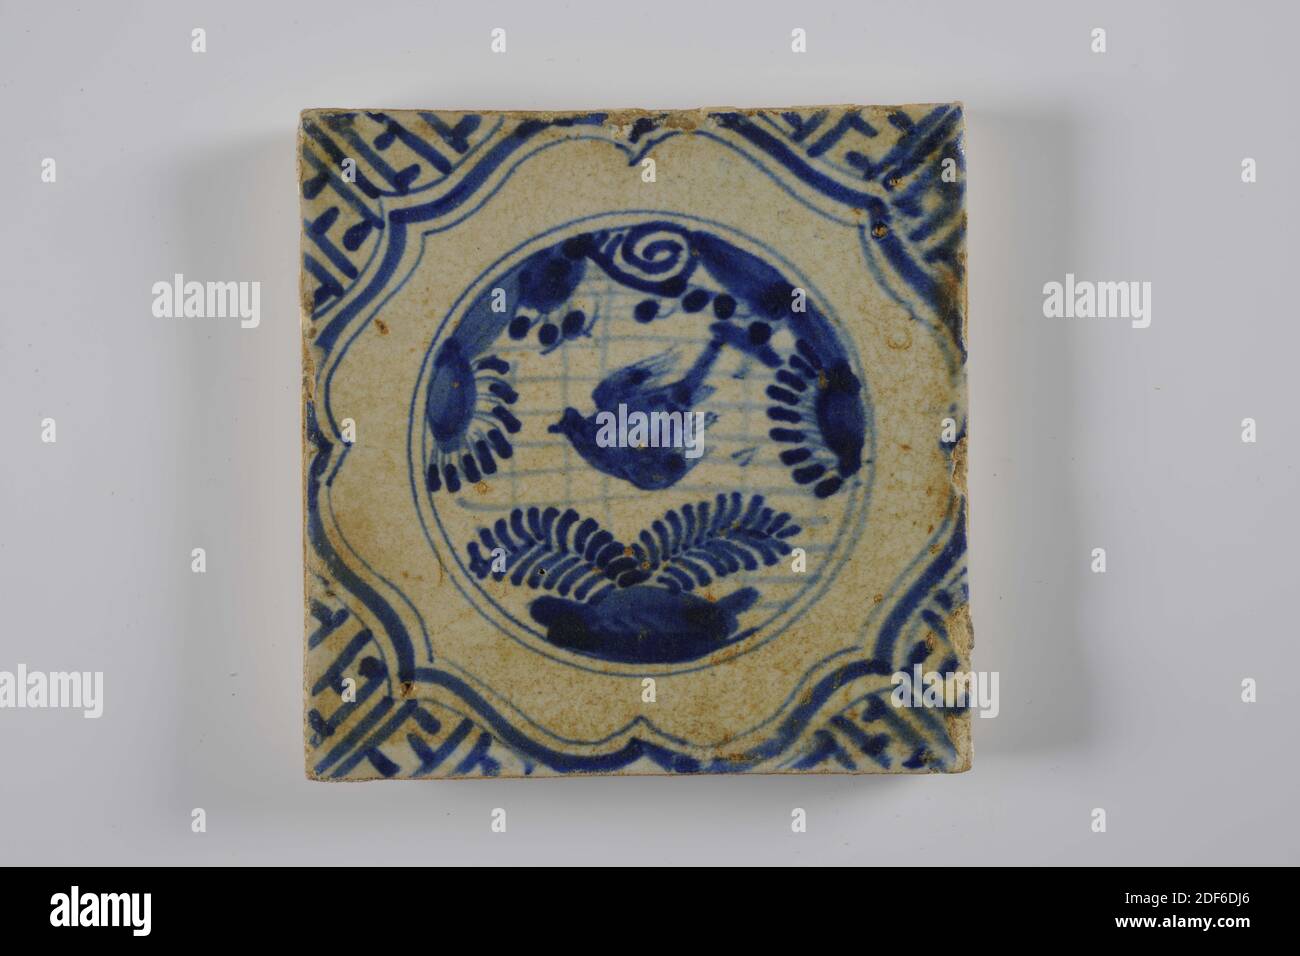 wall tile, Anonymous, second quarter 17th century, tin glaze, earthenware, General: 13.4 x 13.4 x 1.6cm (134 x 134 x 16mm), flower, bird, Earthenware wall tile covered with tin glaze and painted in blue. The tile depicts a Chinese garden within a circle. The image consists of flowers and a bird. The tile has a frame of braces and meanders as corner motif, 1995 Stock Photo